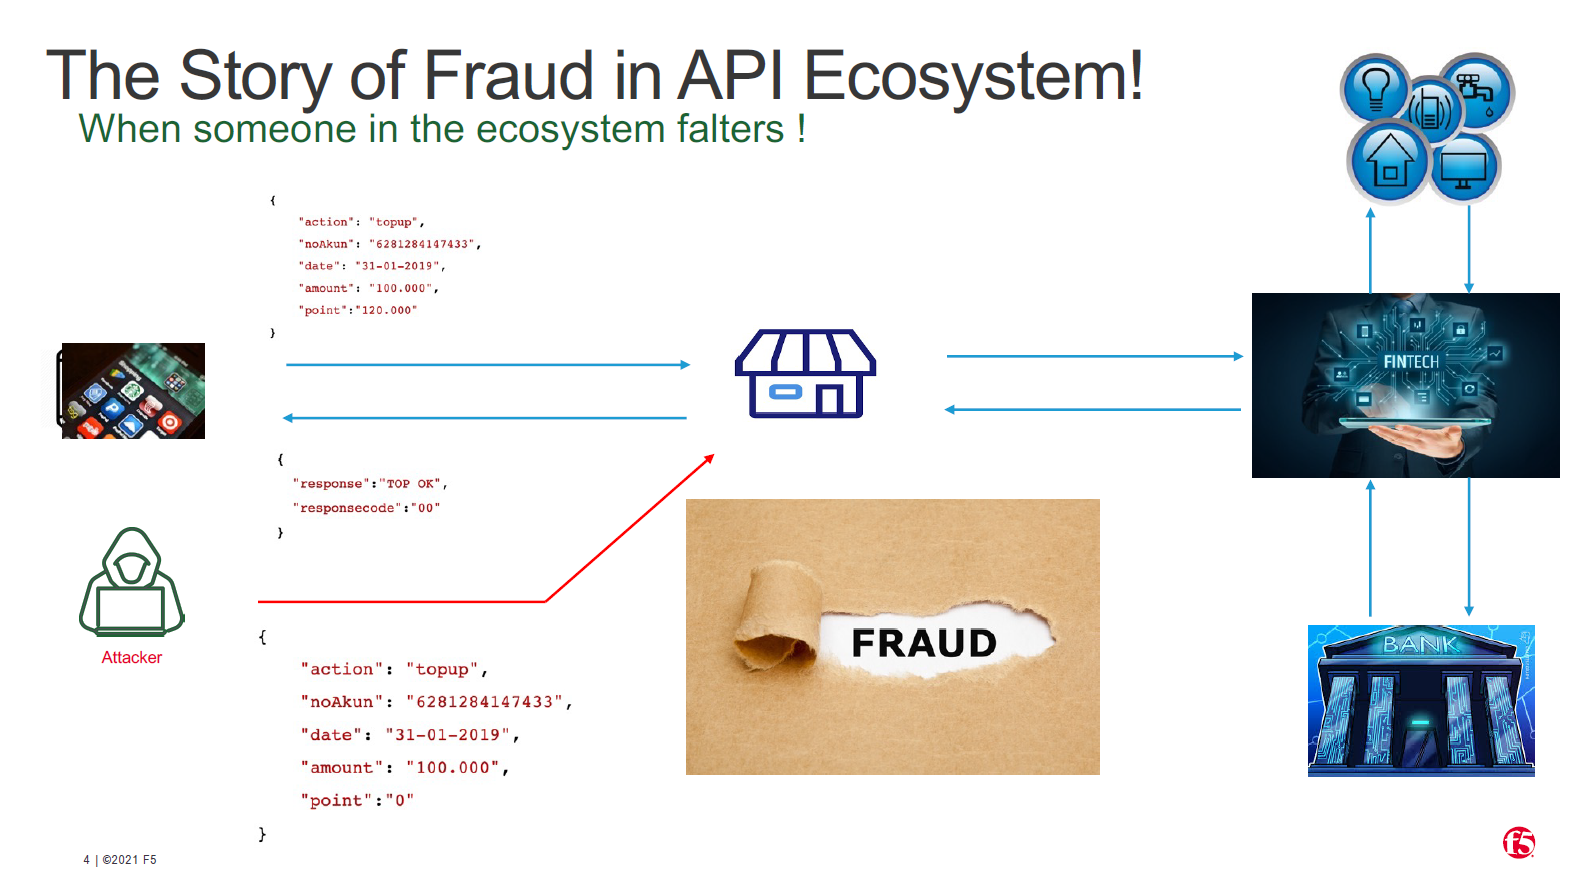 The story of fraud in the API ecosystem